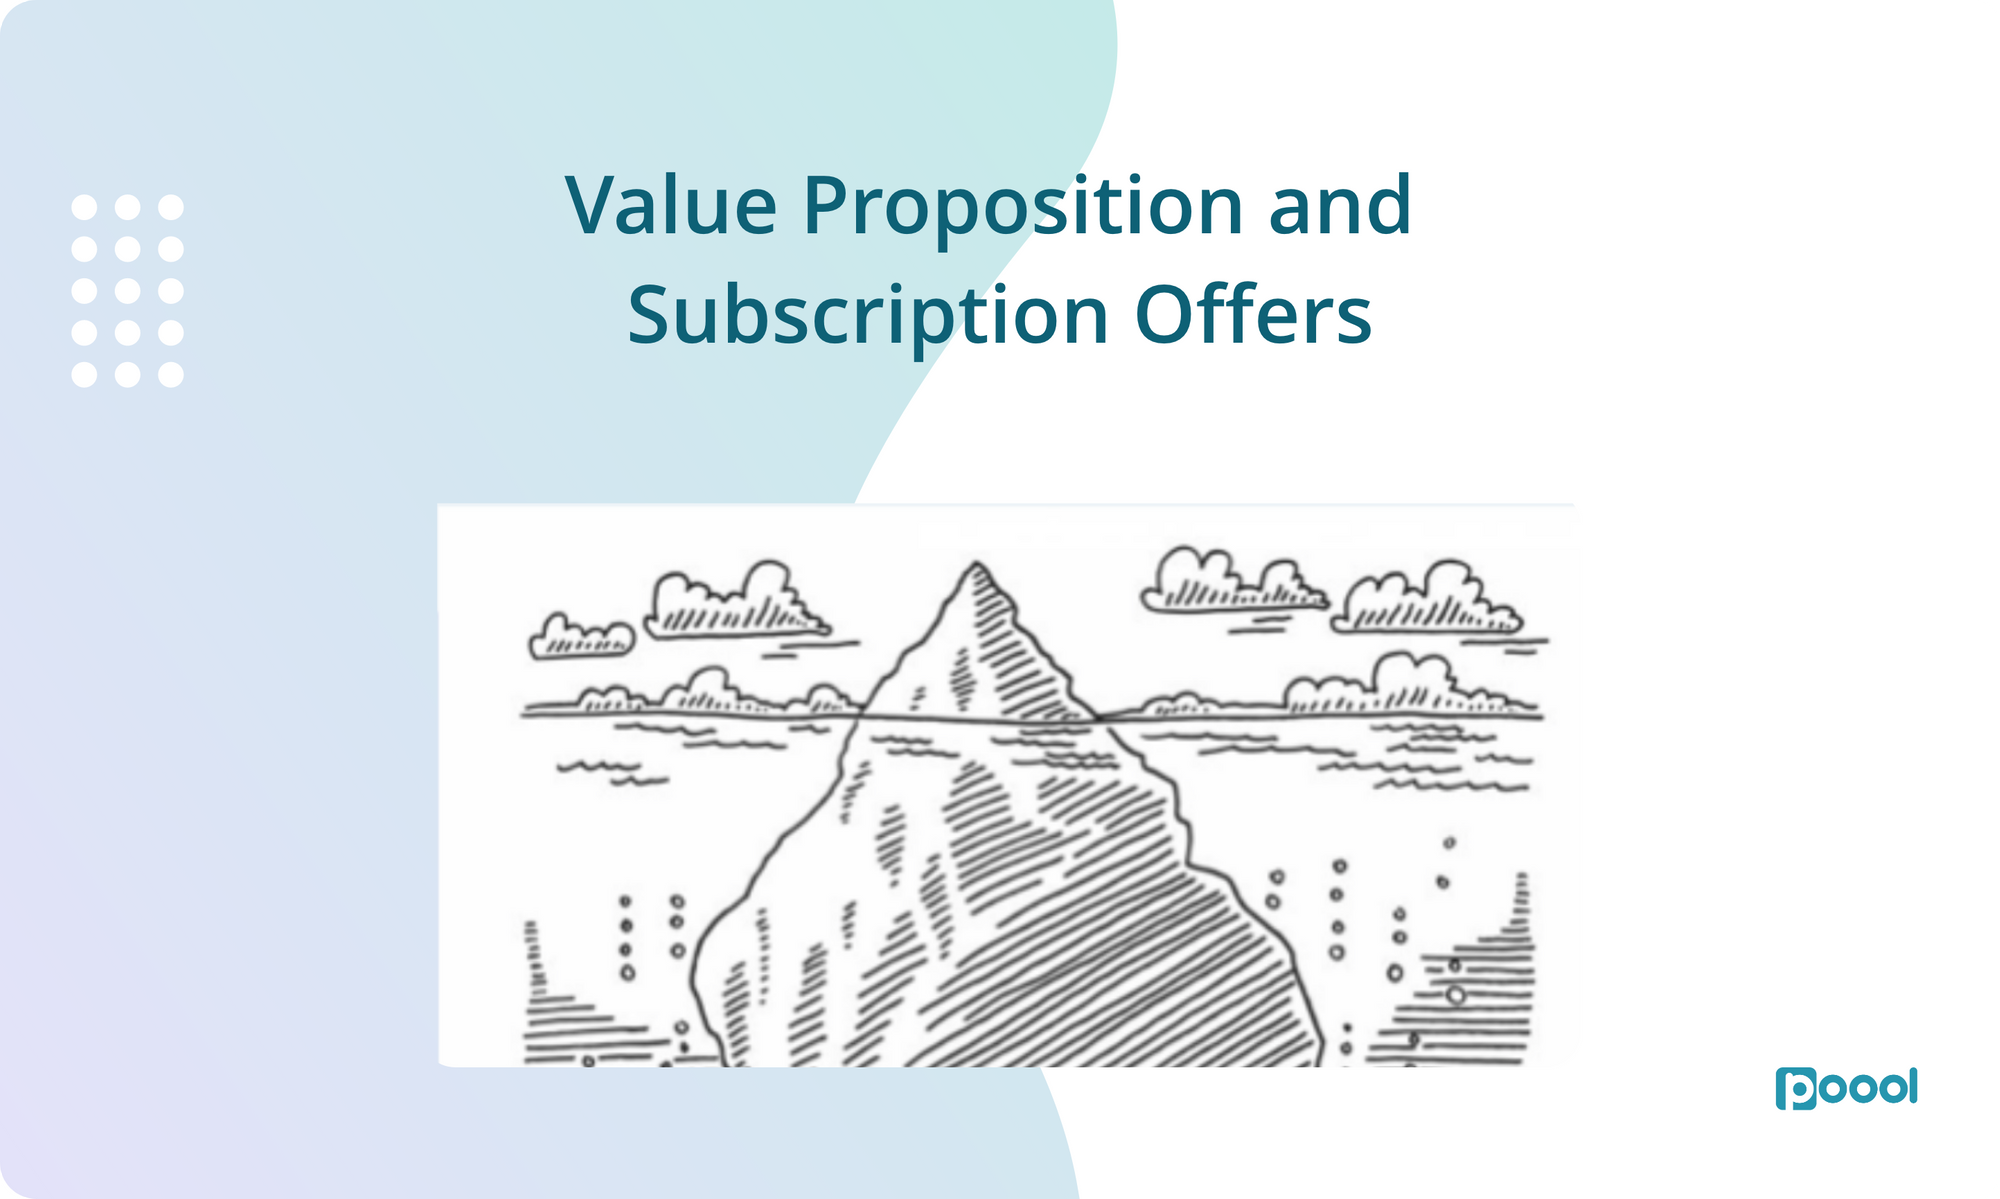 White Paper:
Value Proposition and Subscription Offers for Publishers.